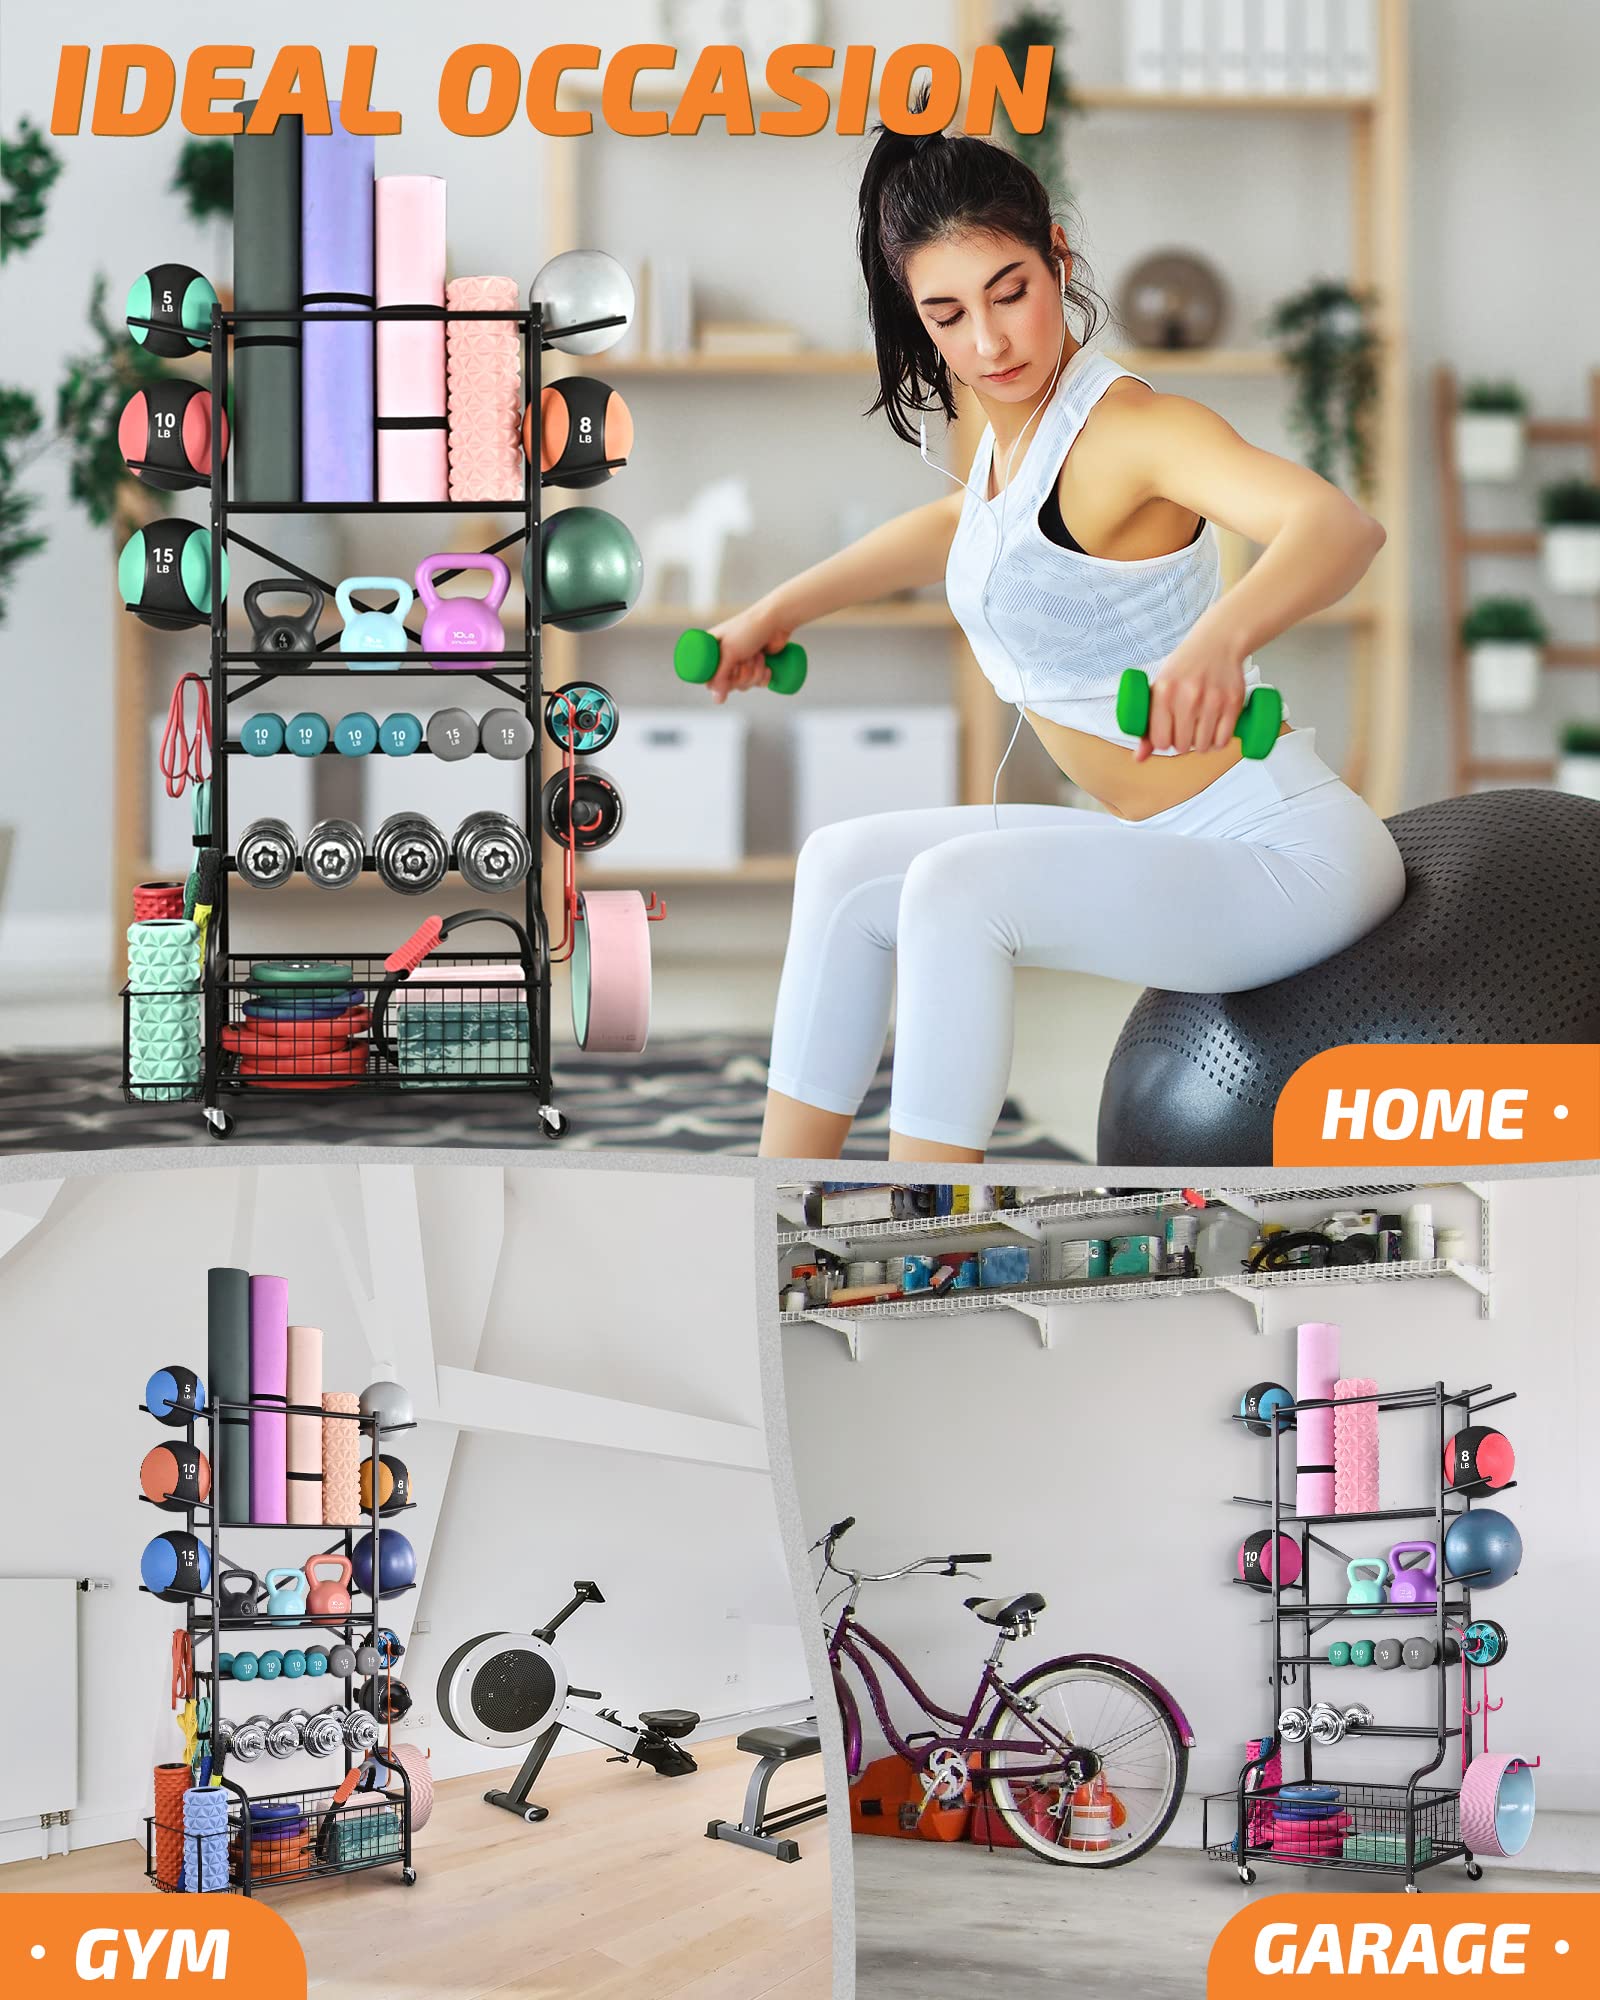 PLKOW Weight Rack for Dumbbells, Kettlebells, Yoga Mat and Balls With Extra Top Organizer